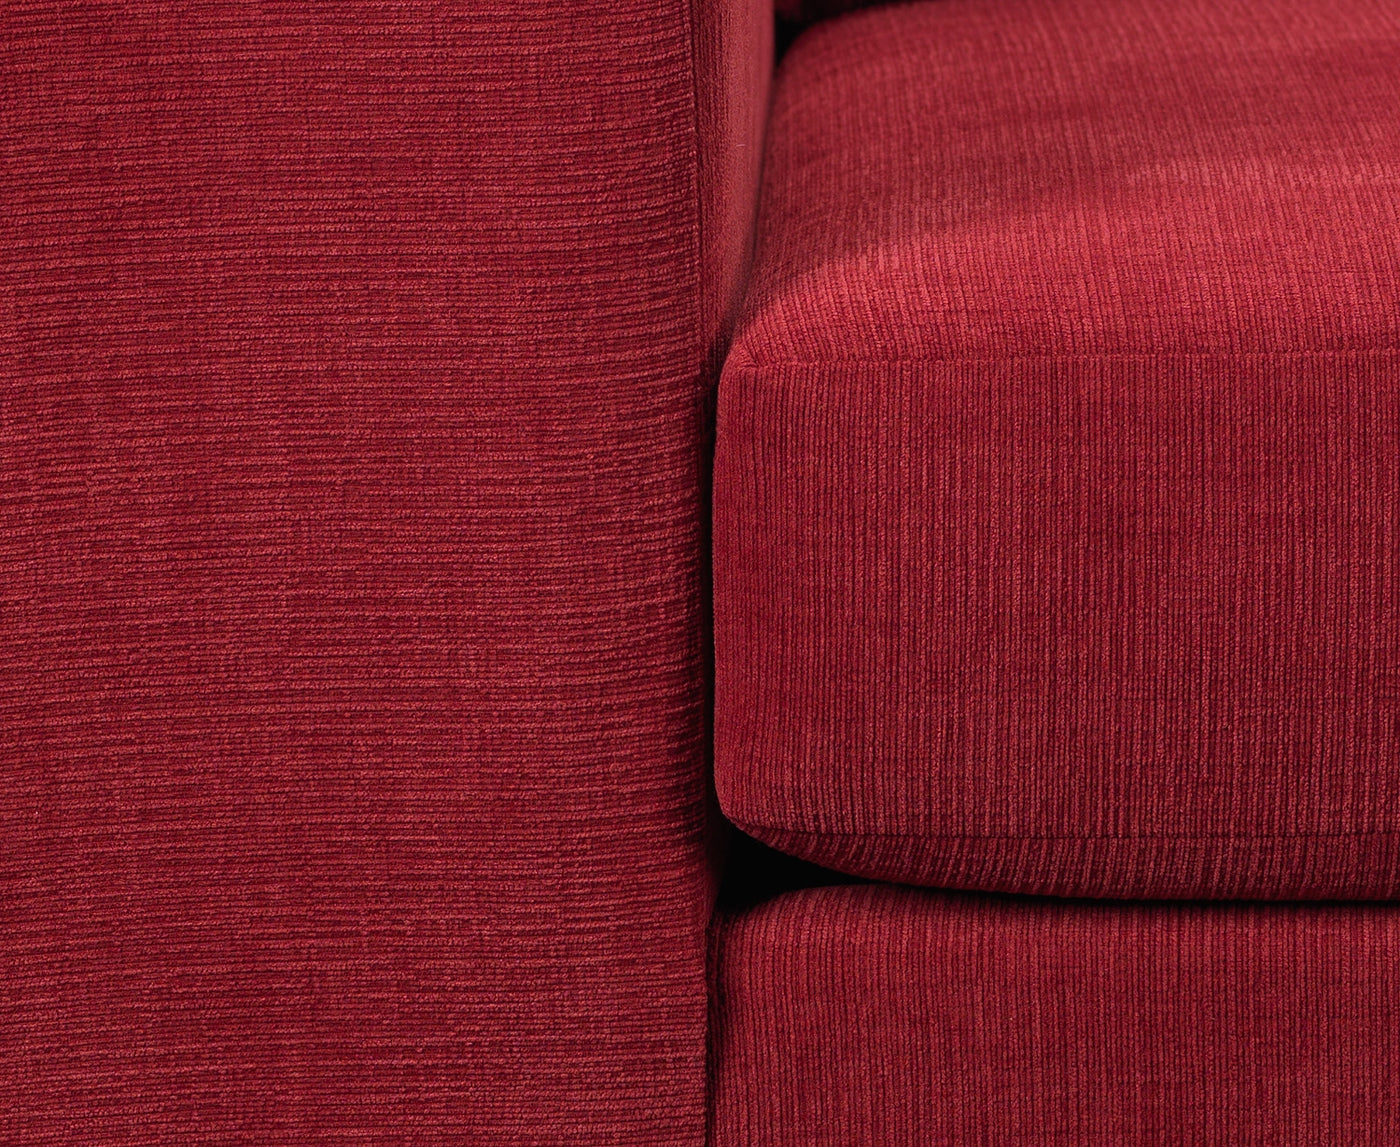 Fava Sofa, Loveseat and Chair Set - Red